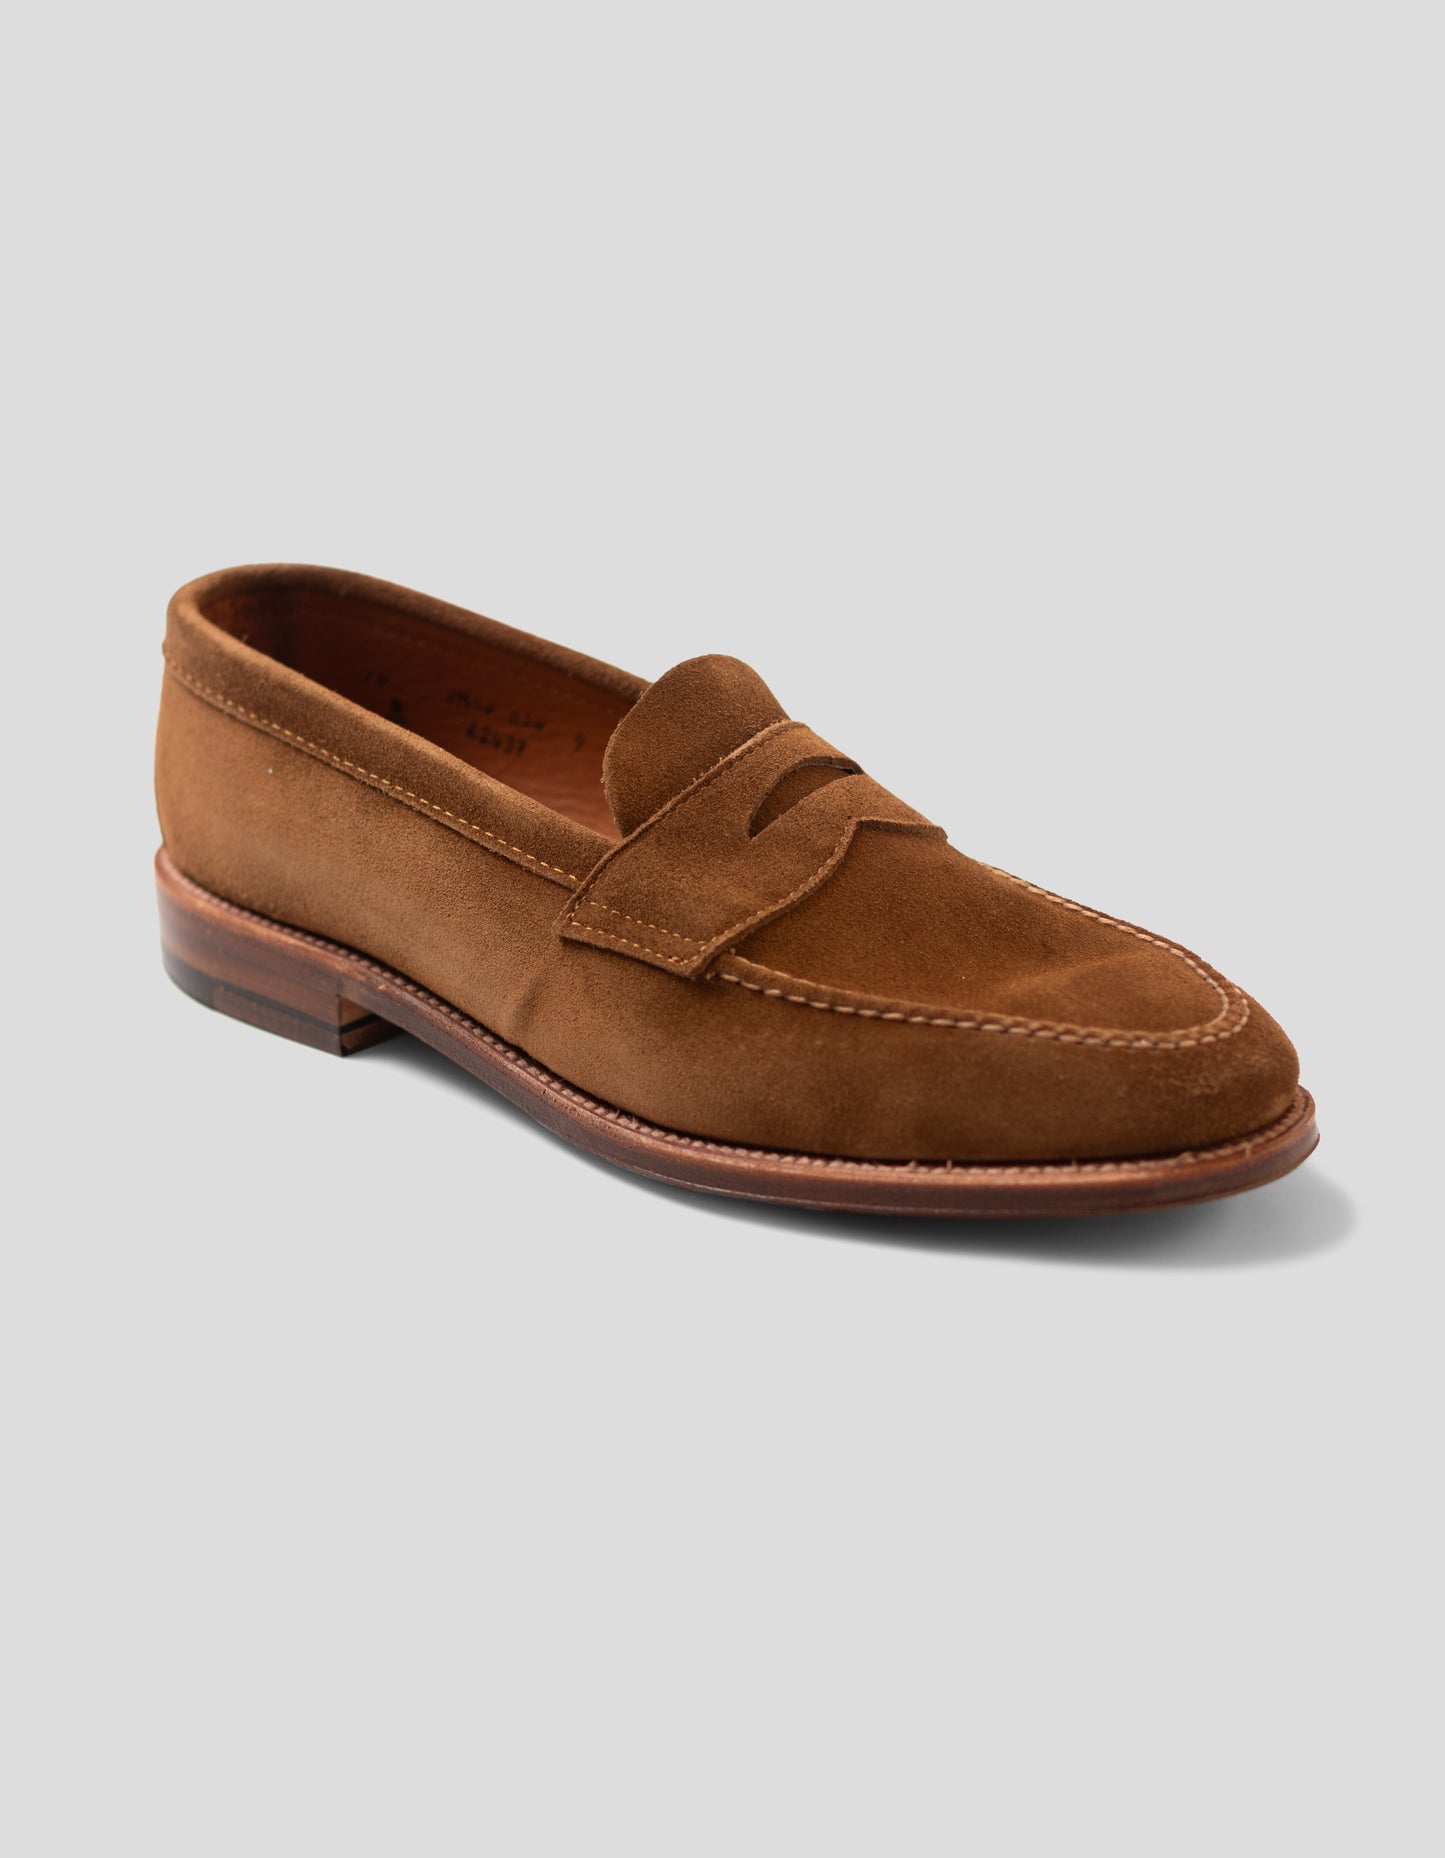 ALDEN SNUFF SUEDE UNLINED PENNY LOAFER - TAN